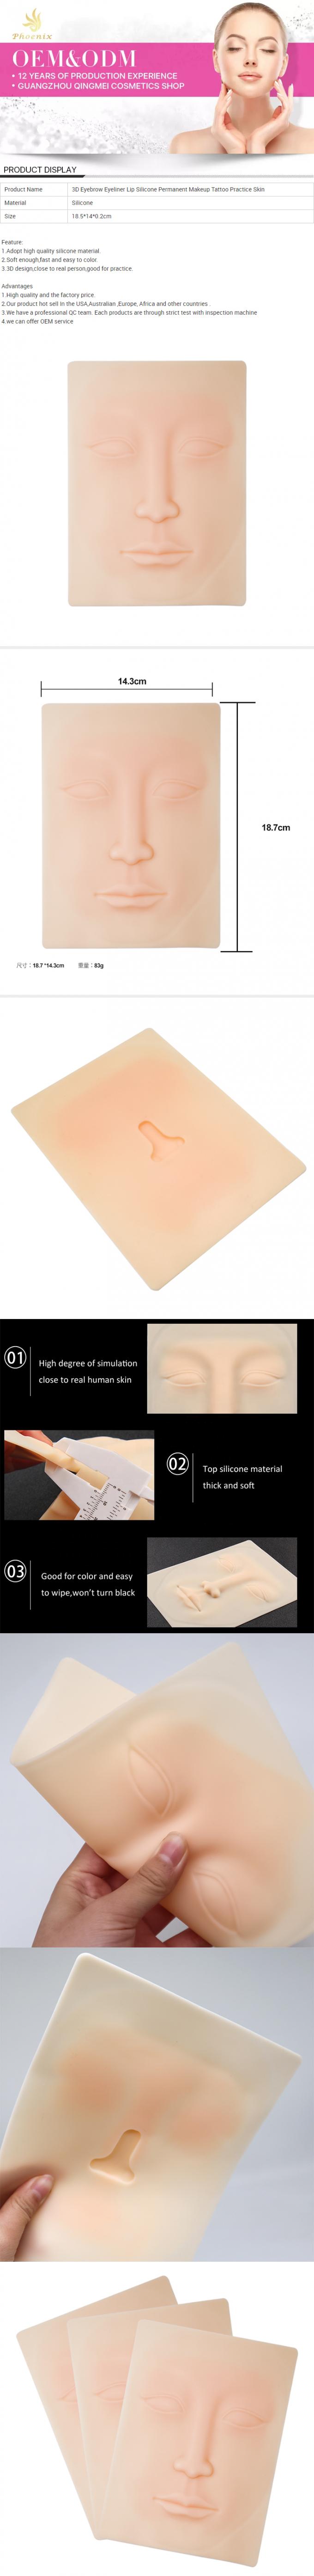 Soft 3D Silicone 83g Microblading Practice Skin Permanent Makeup 0